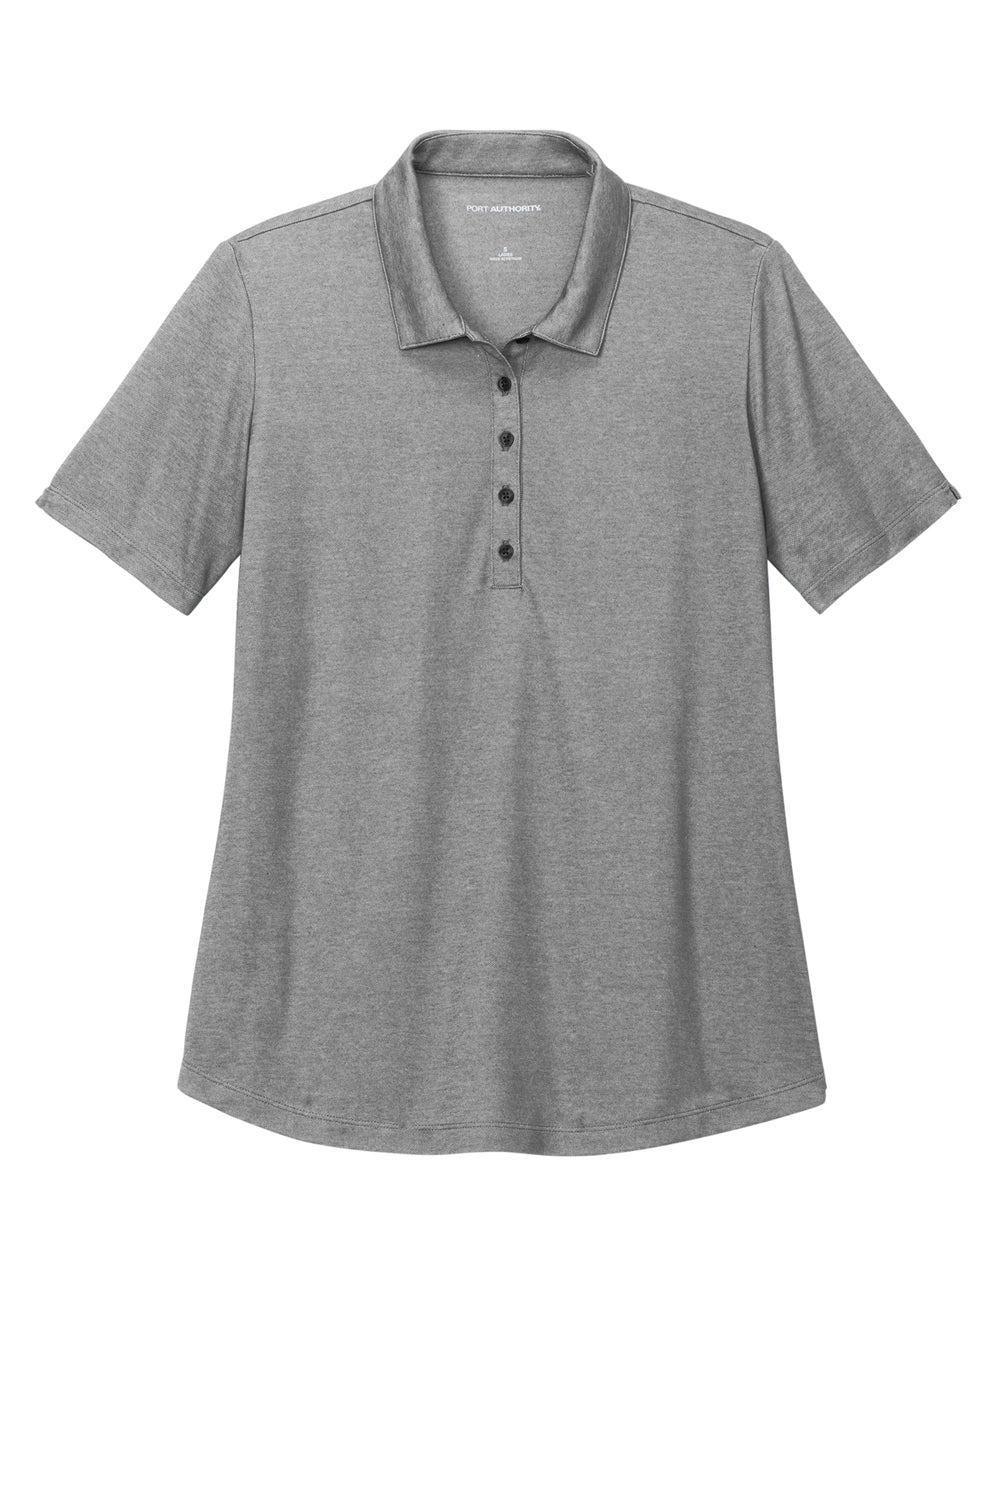 Port Authority Womens Fine Pique Short Sleeve Polo Shirt Heather Charcoal Grey Flat Front